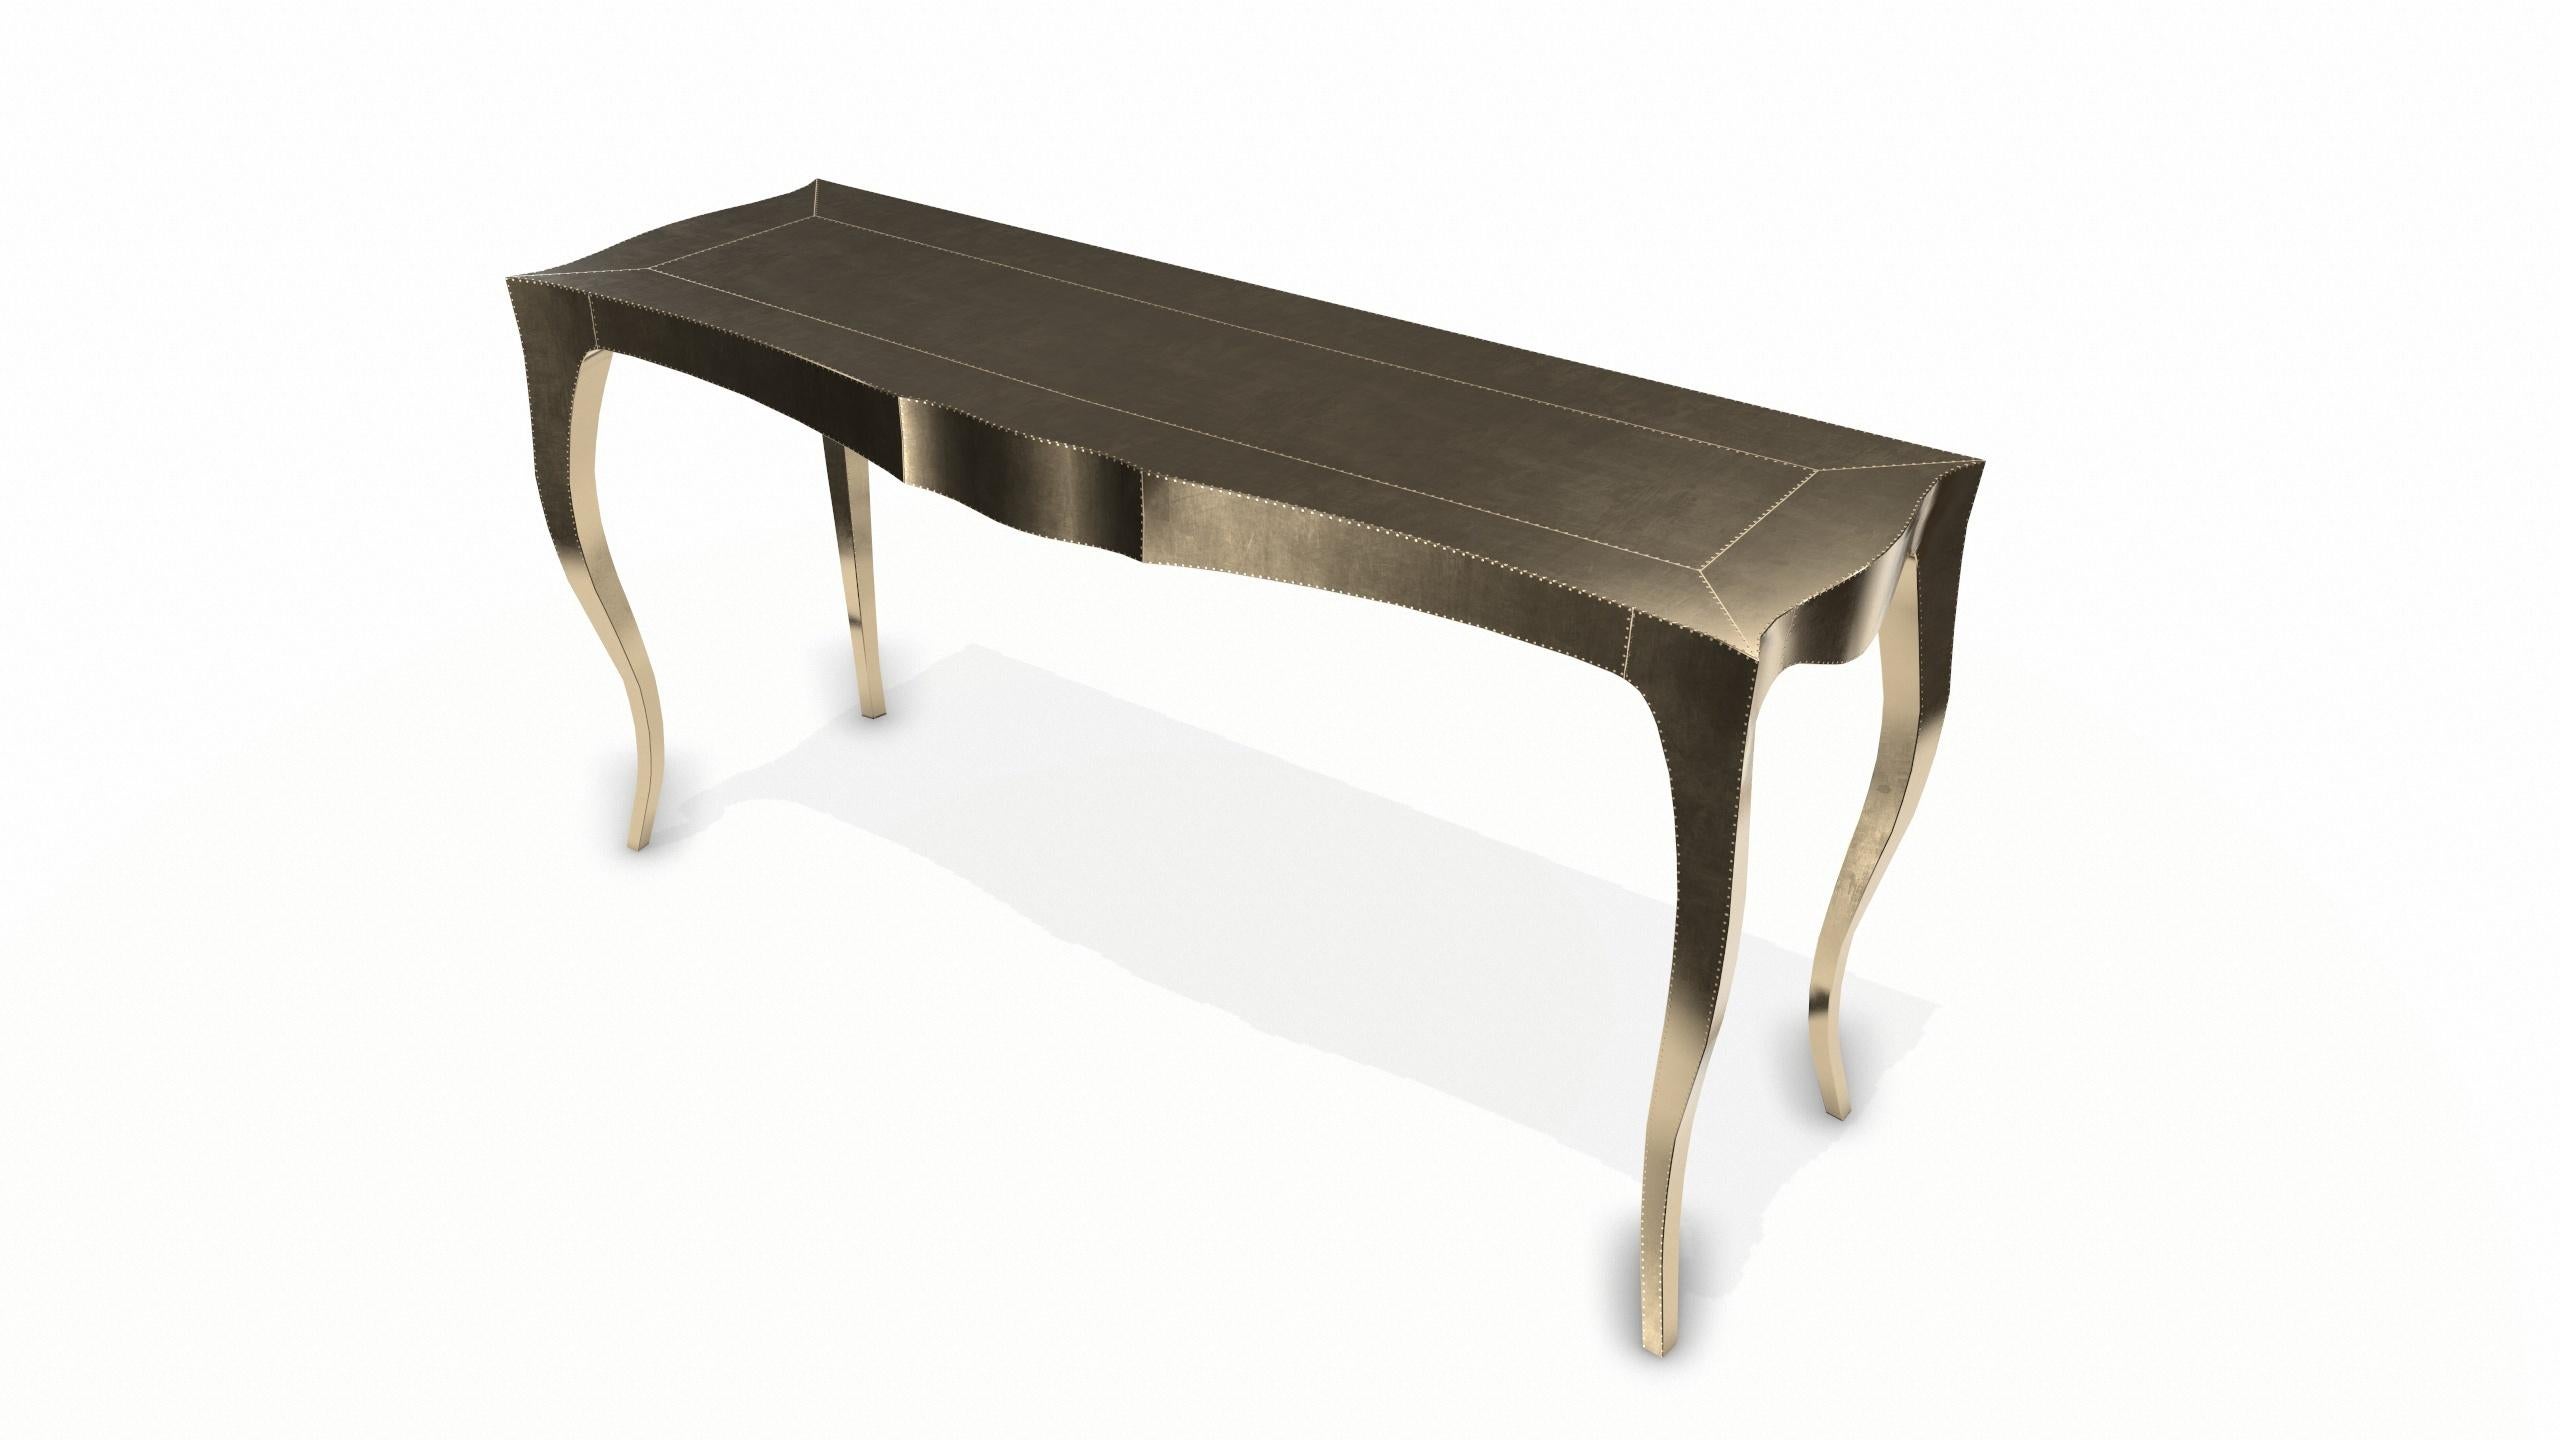 Other Louise Console Art Deco Side Tables Smooth Brass by Paul Mathieu for S. Odegard For Sale